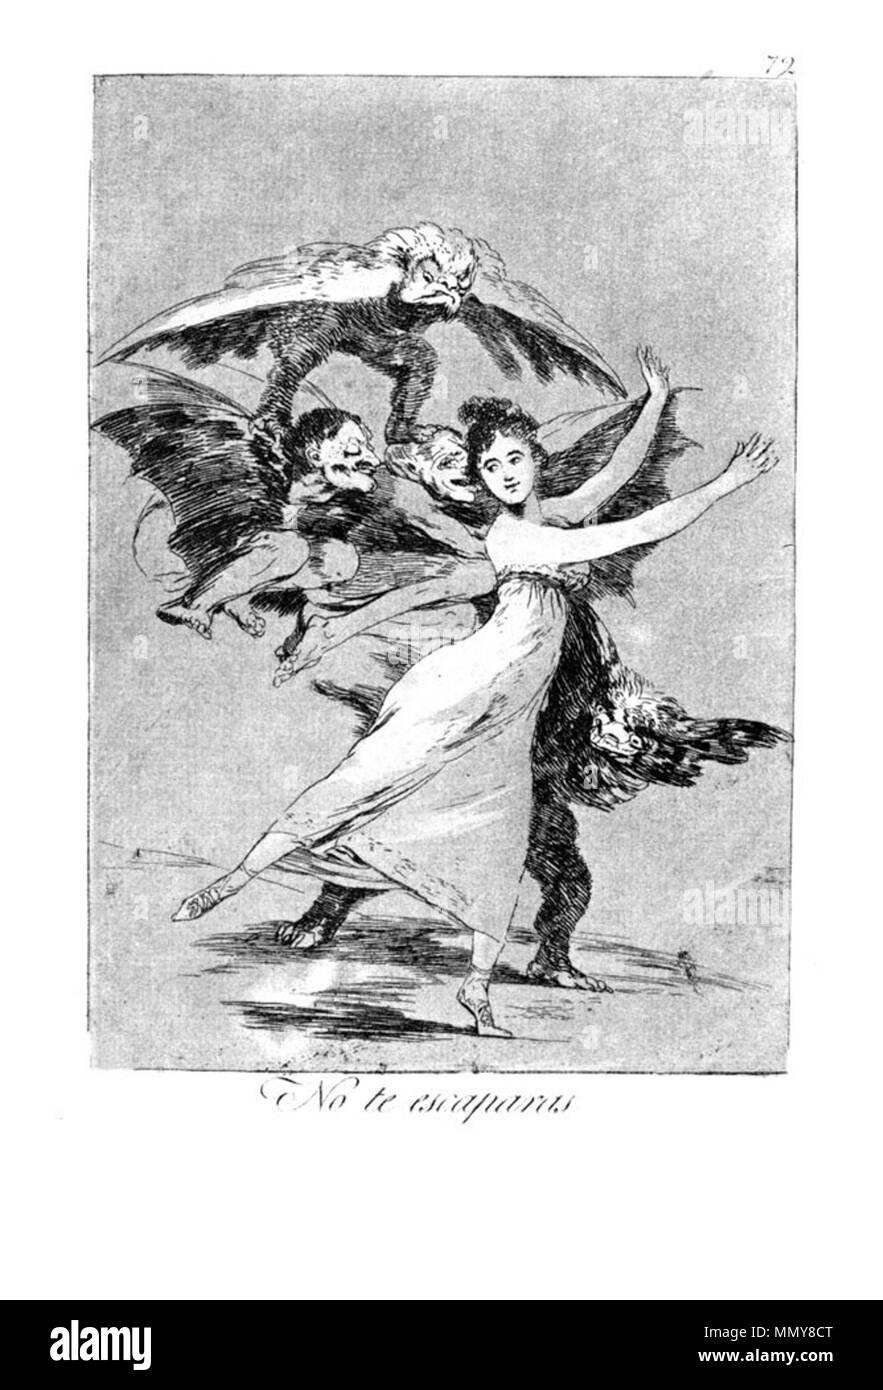 . Los Caprichos is a set of 80 aquatint prints created by Francisco Goya for release in 1799.  . 1799.   Francisco Goya  (1746–1828)      Alternative names Francisco Goya Lucientes, Francisco de Goya y Lucientes, Francisco José Goya Lucientes  Description Spanish painter, printmaker, lithographer, engraver and etcher  Date of birth/death 30 March 1746 16 April 1828  Location of birth/death Fuendetodos Bordeaux  Work location Madrid, Zaragoza, Bordeaux  Authority control  : Q5432 VIAF:?54343141 ISNI:?0000 0001 2280 1608 ULAN:?500118936 LCCN:?n79003363 NLA:?36545788 WorldCat Goya - Caprichos (72 Stock Photo